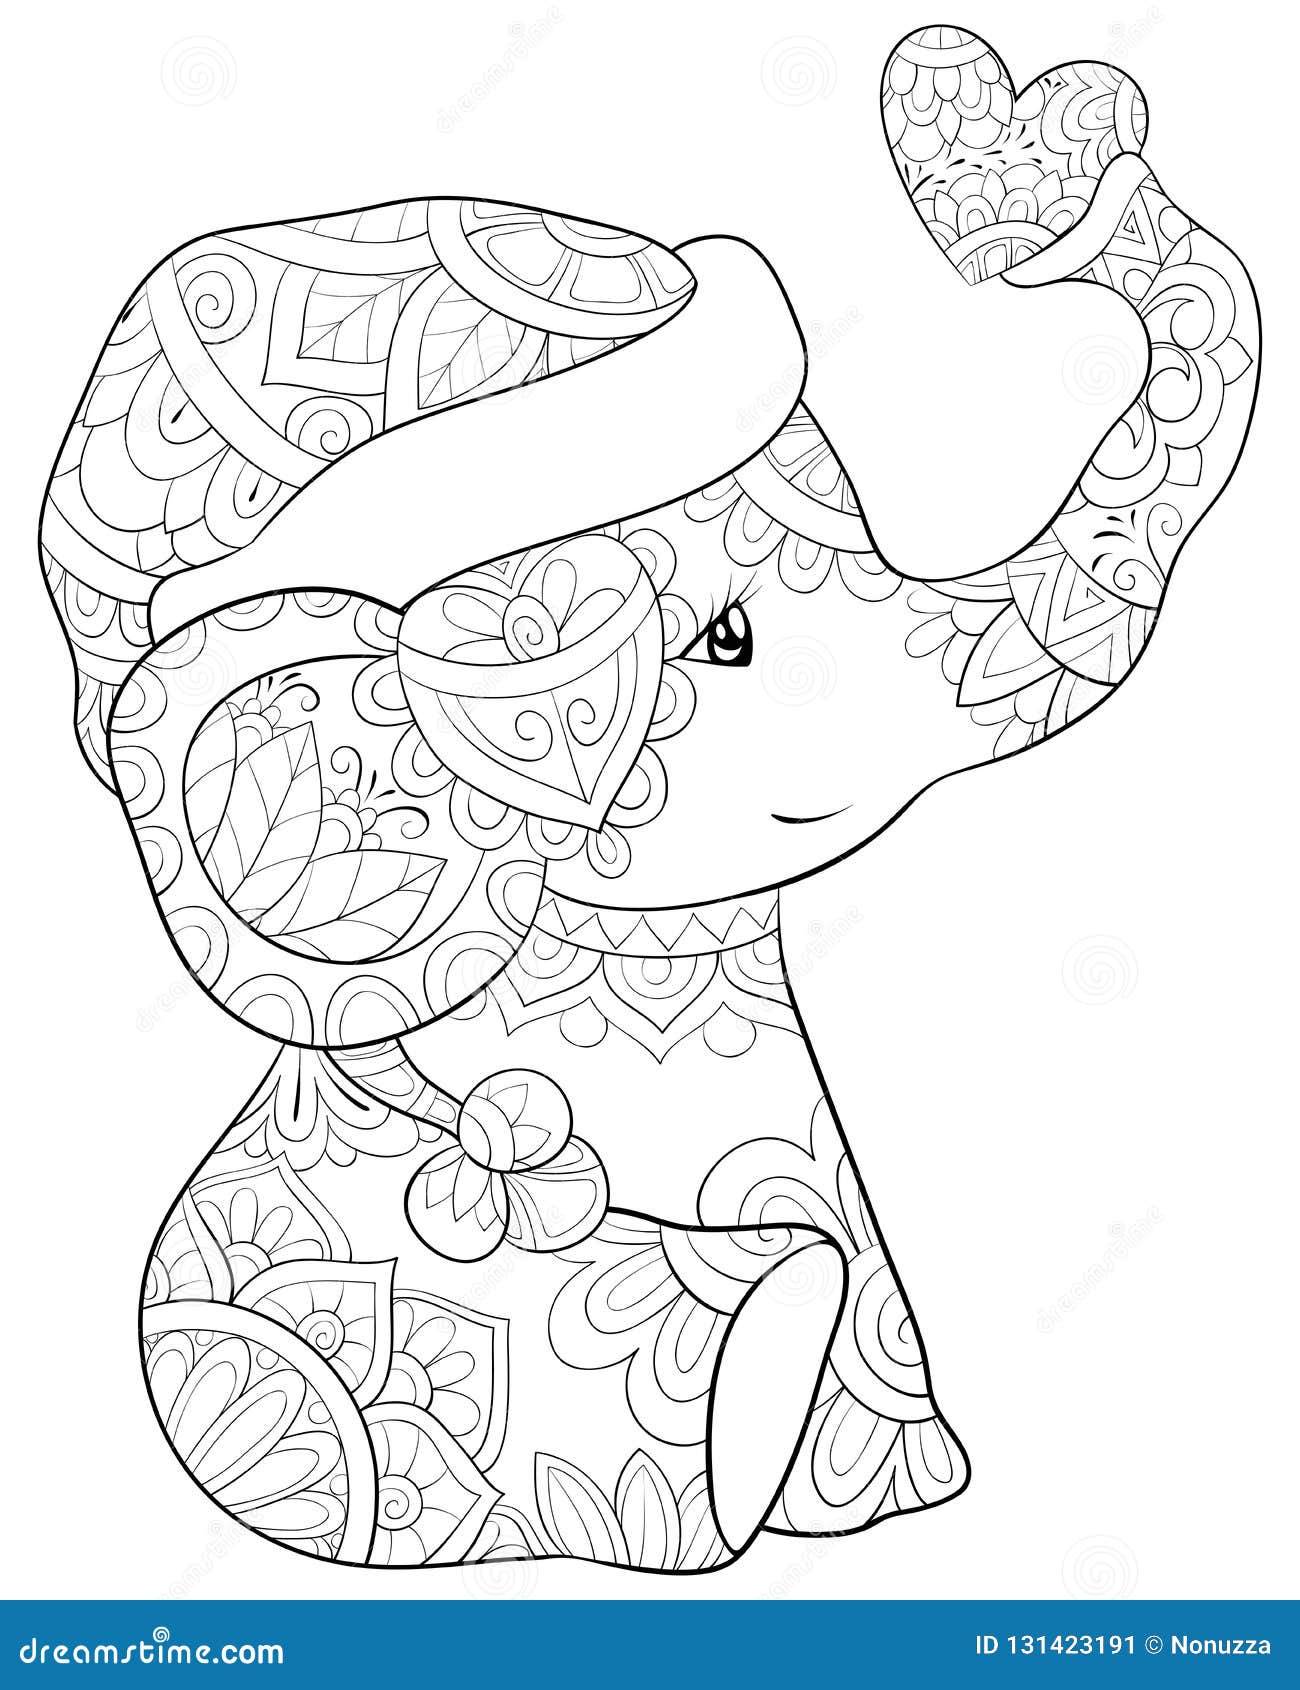 Adult Coloring Book,page a Cute Little Elphant with Heart Image for ...